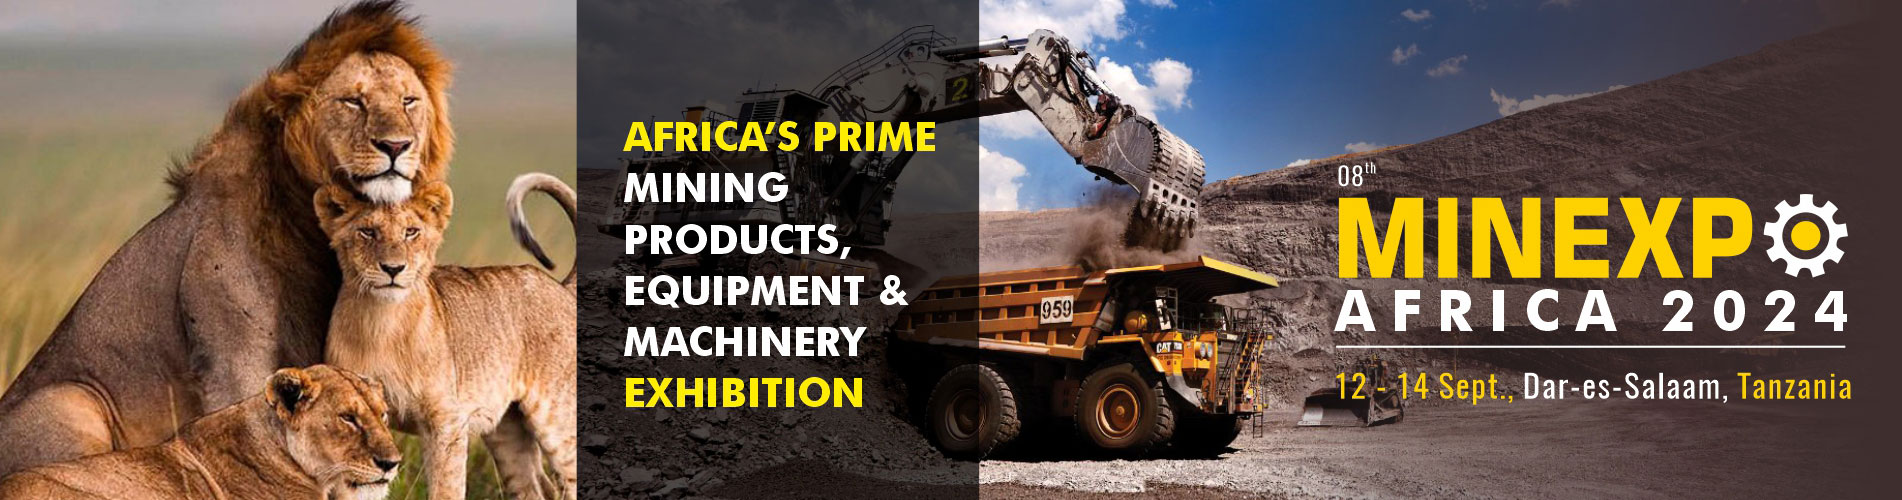 Minexpo Tanzania 2024 - International MINING PRODUCTS, EQUIPMENTS AND MACHINERY  Show Africa